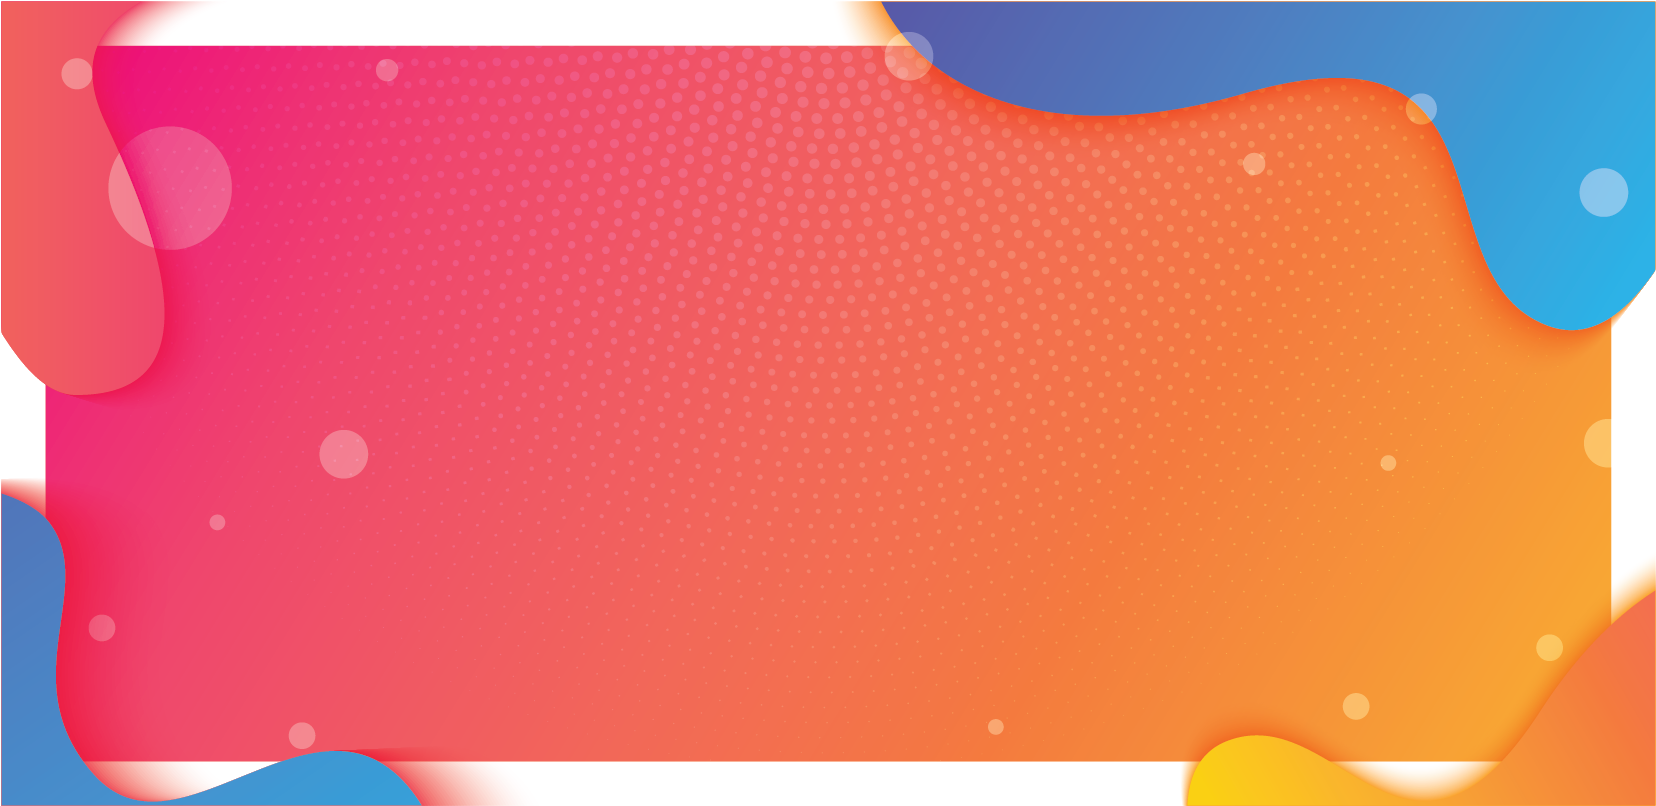 Download Pink Orange Gradient Banner White Dot With Abstract - Graphic  Design PNG Image with No Background 